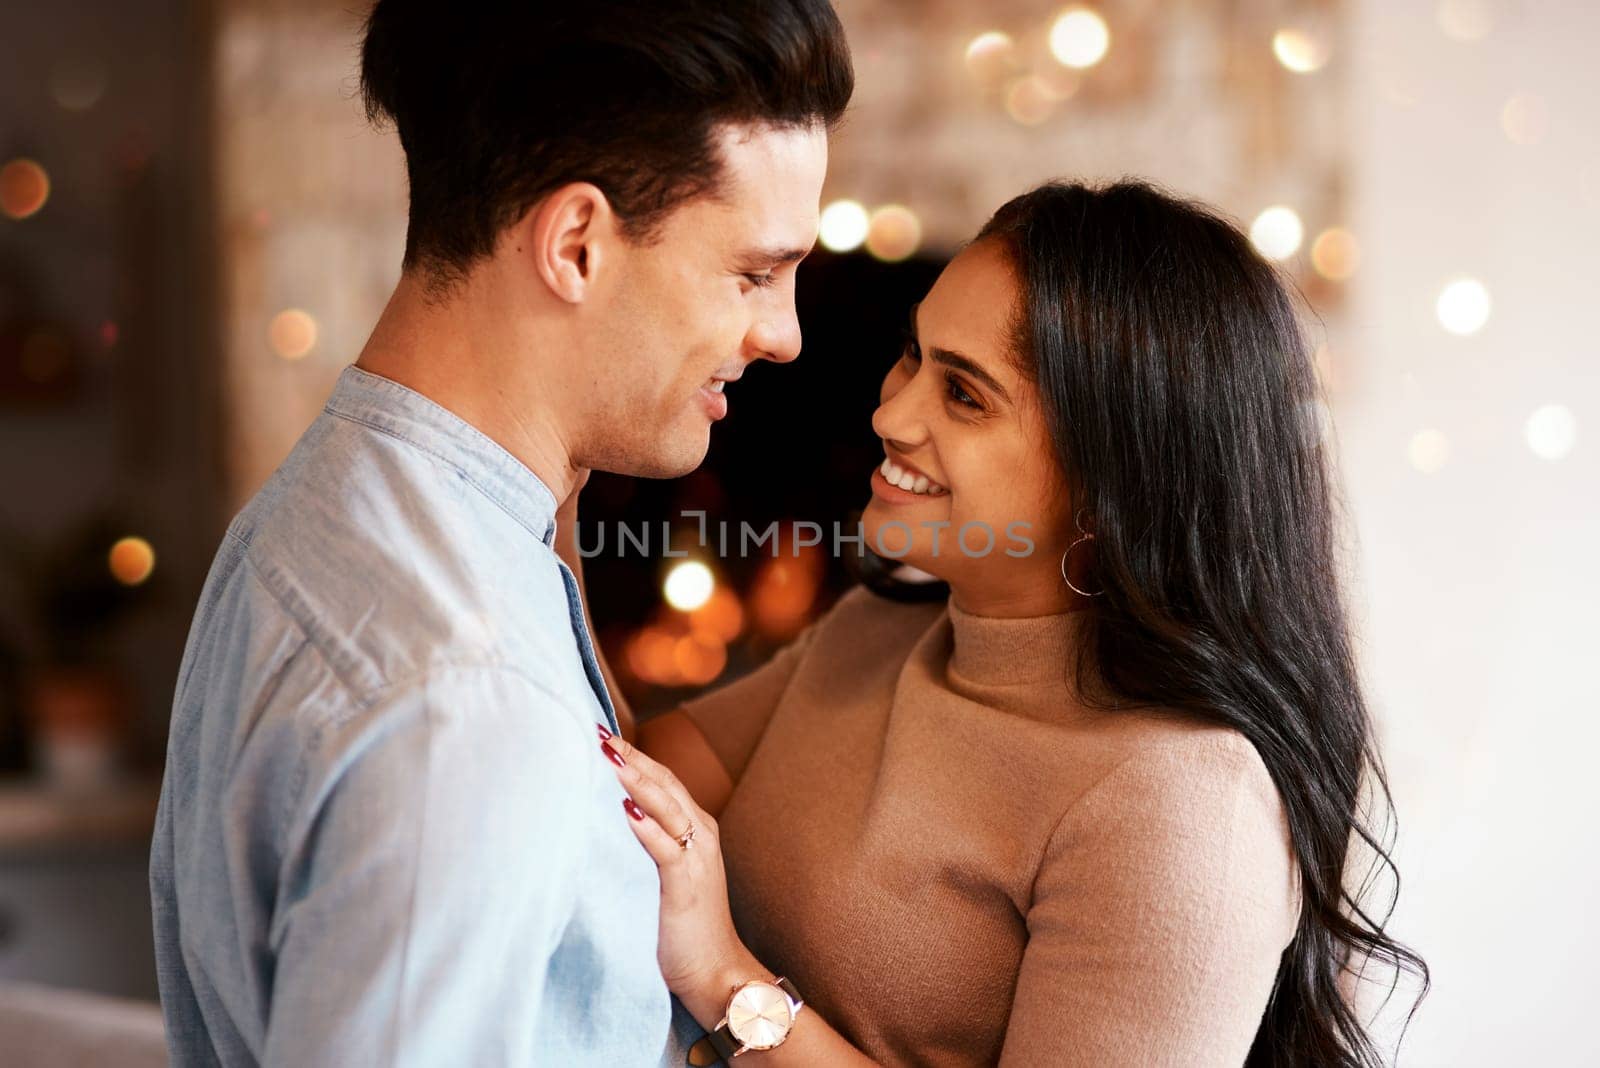 Love, romance and happy couple hugging on a date for valentines day, romantic event or anniversary. Happiness, smile and interracial man and woman embracing after a dinner celebration together